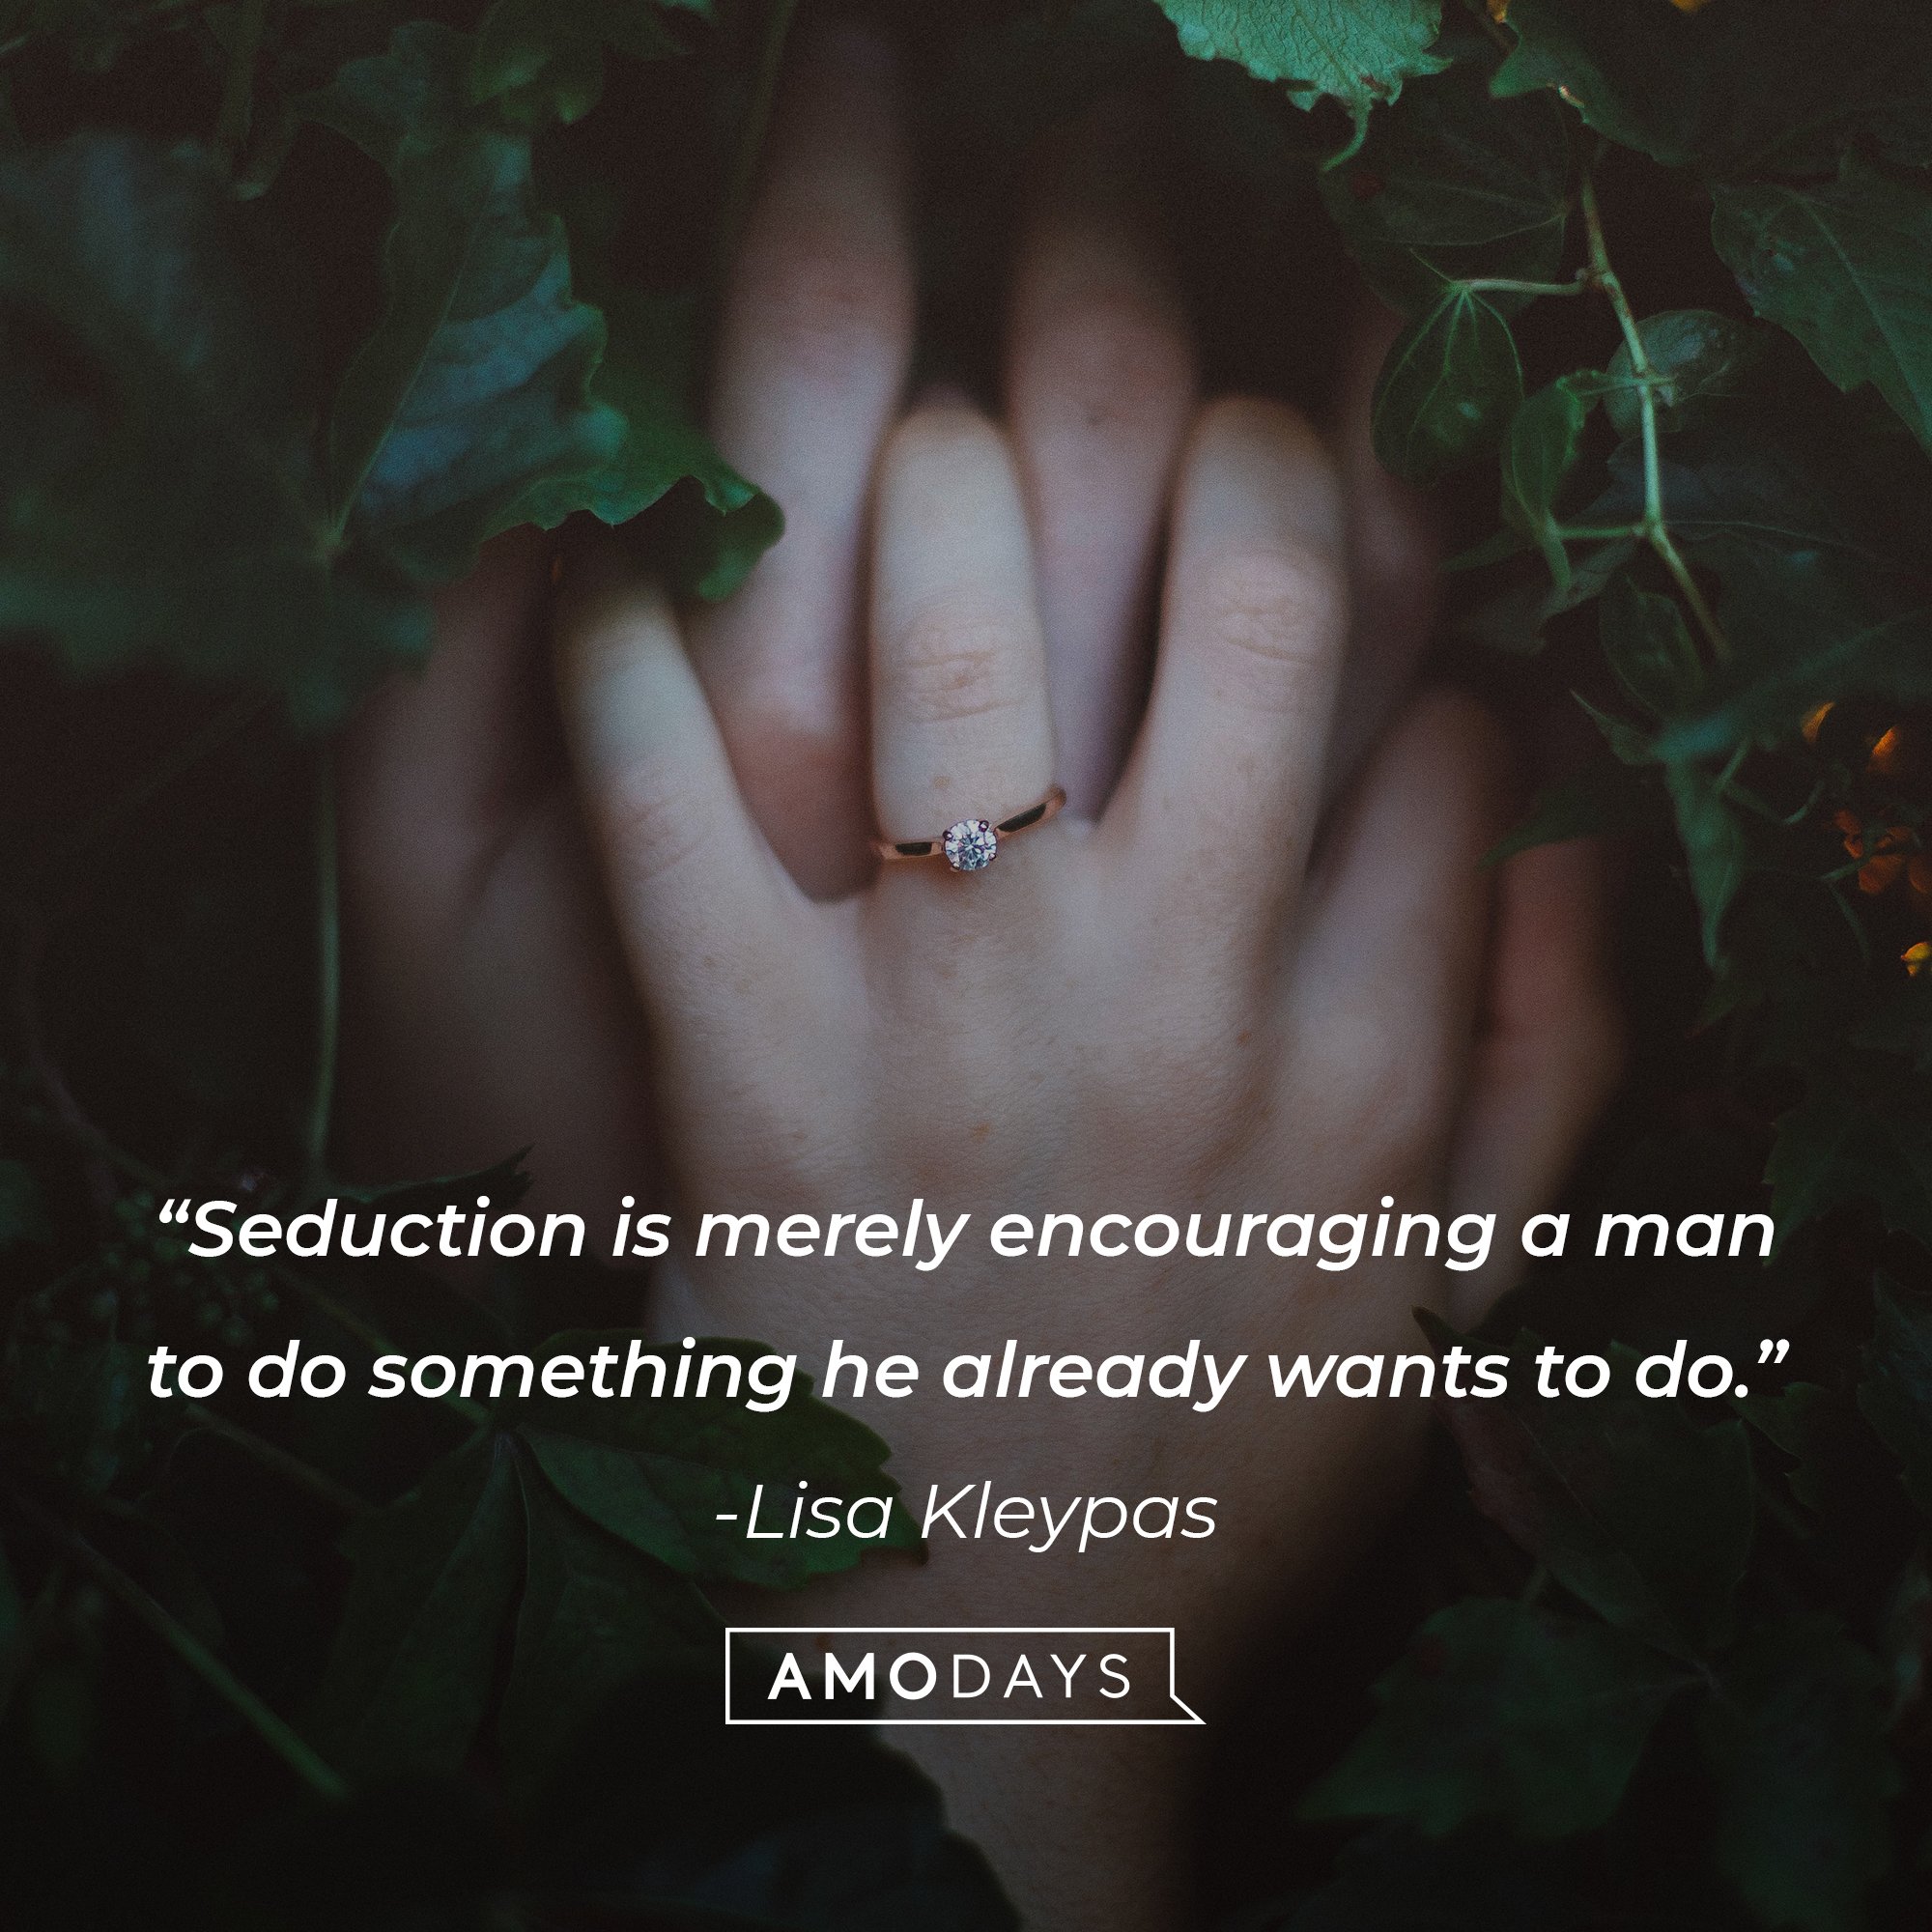  Lisa Kleypas’ quote: “Seduction is merely encouraging a man to do something he already wants to do.”  | Image: AmoDays